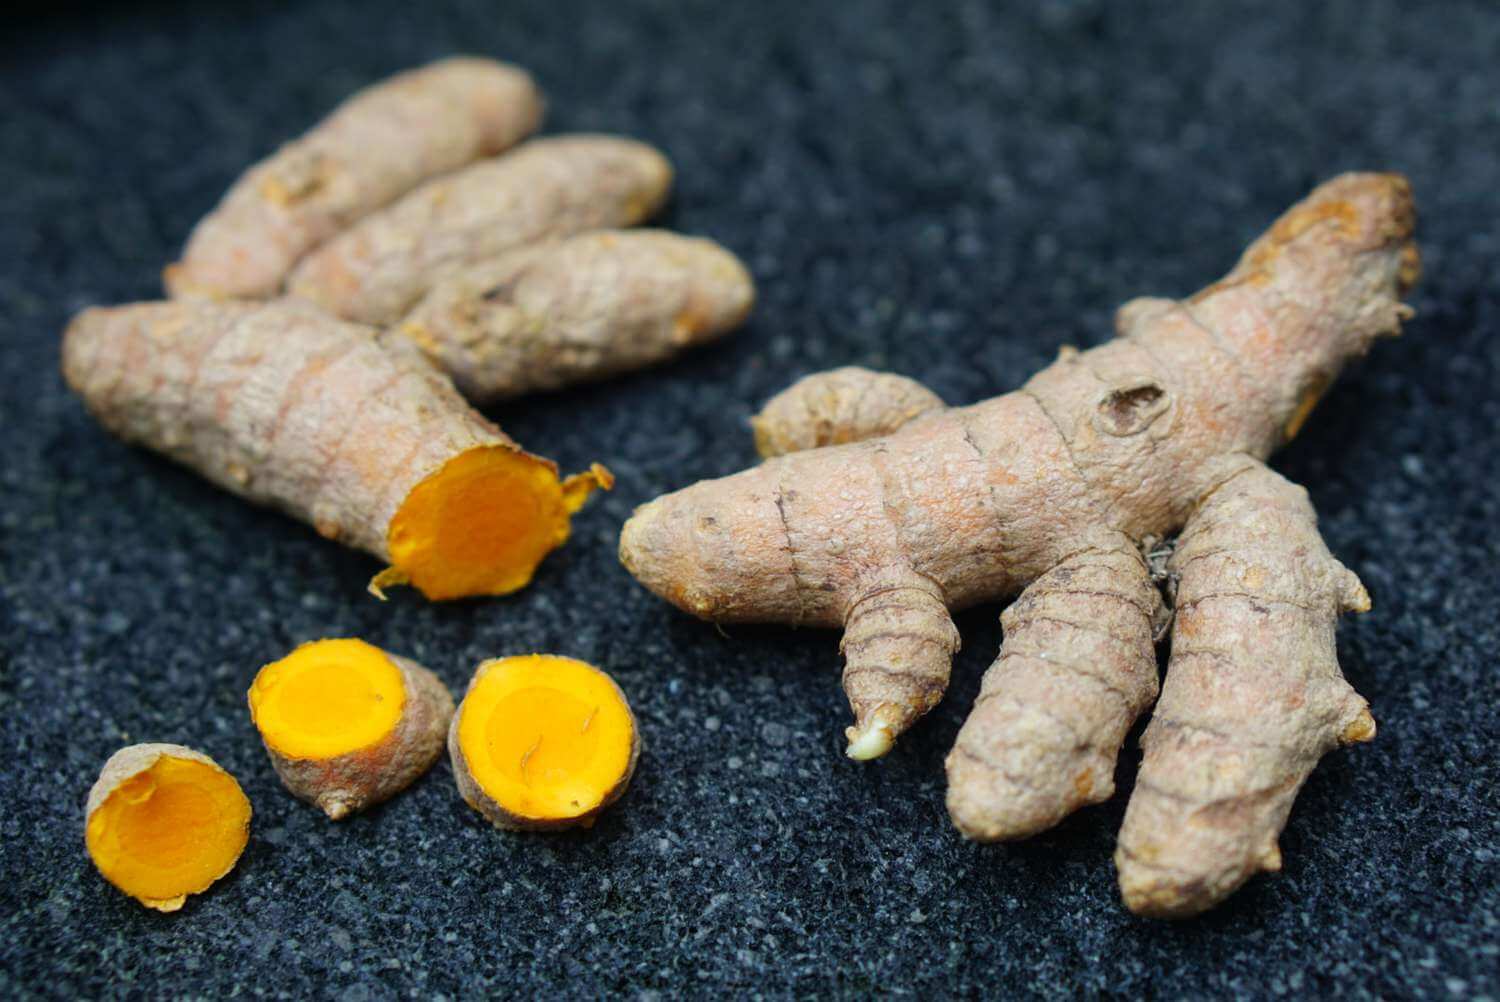 Turmeric is a superfood for its anti-inflammatory and anti-oxident properties